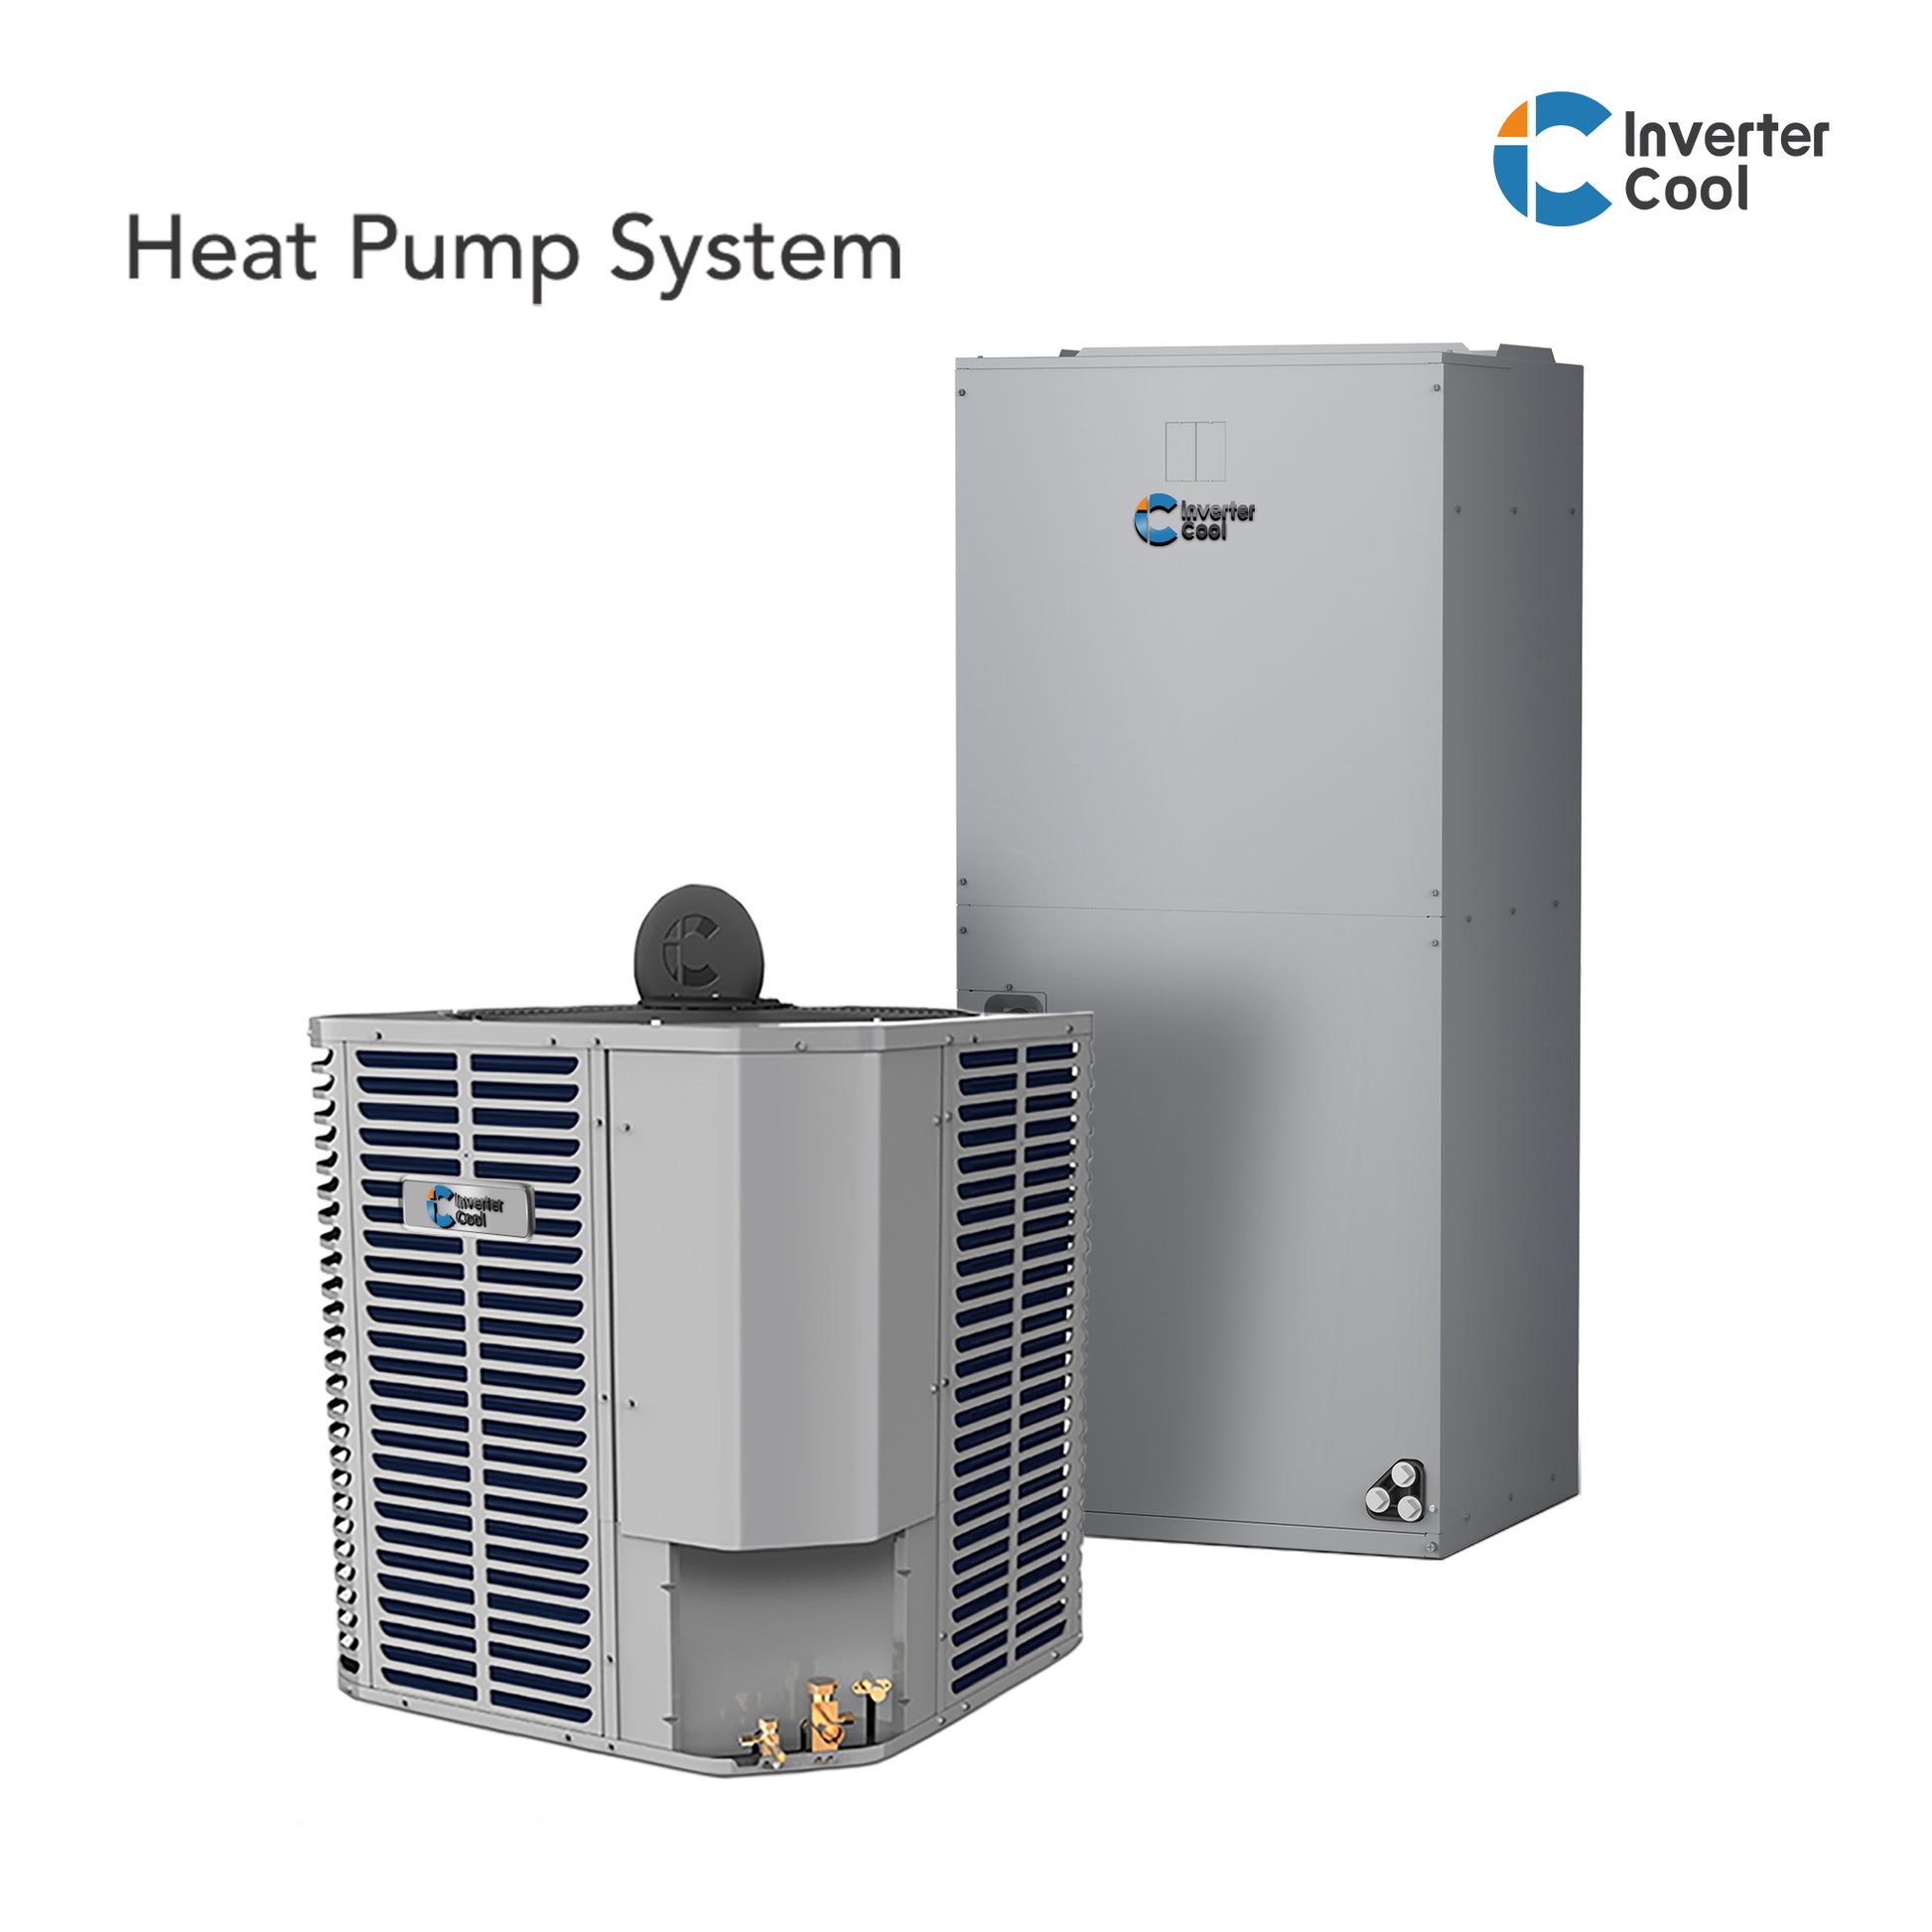 Special Offer: InverterCool® 5 Ton Heat Pump system with Installation in Florida